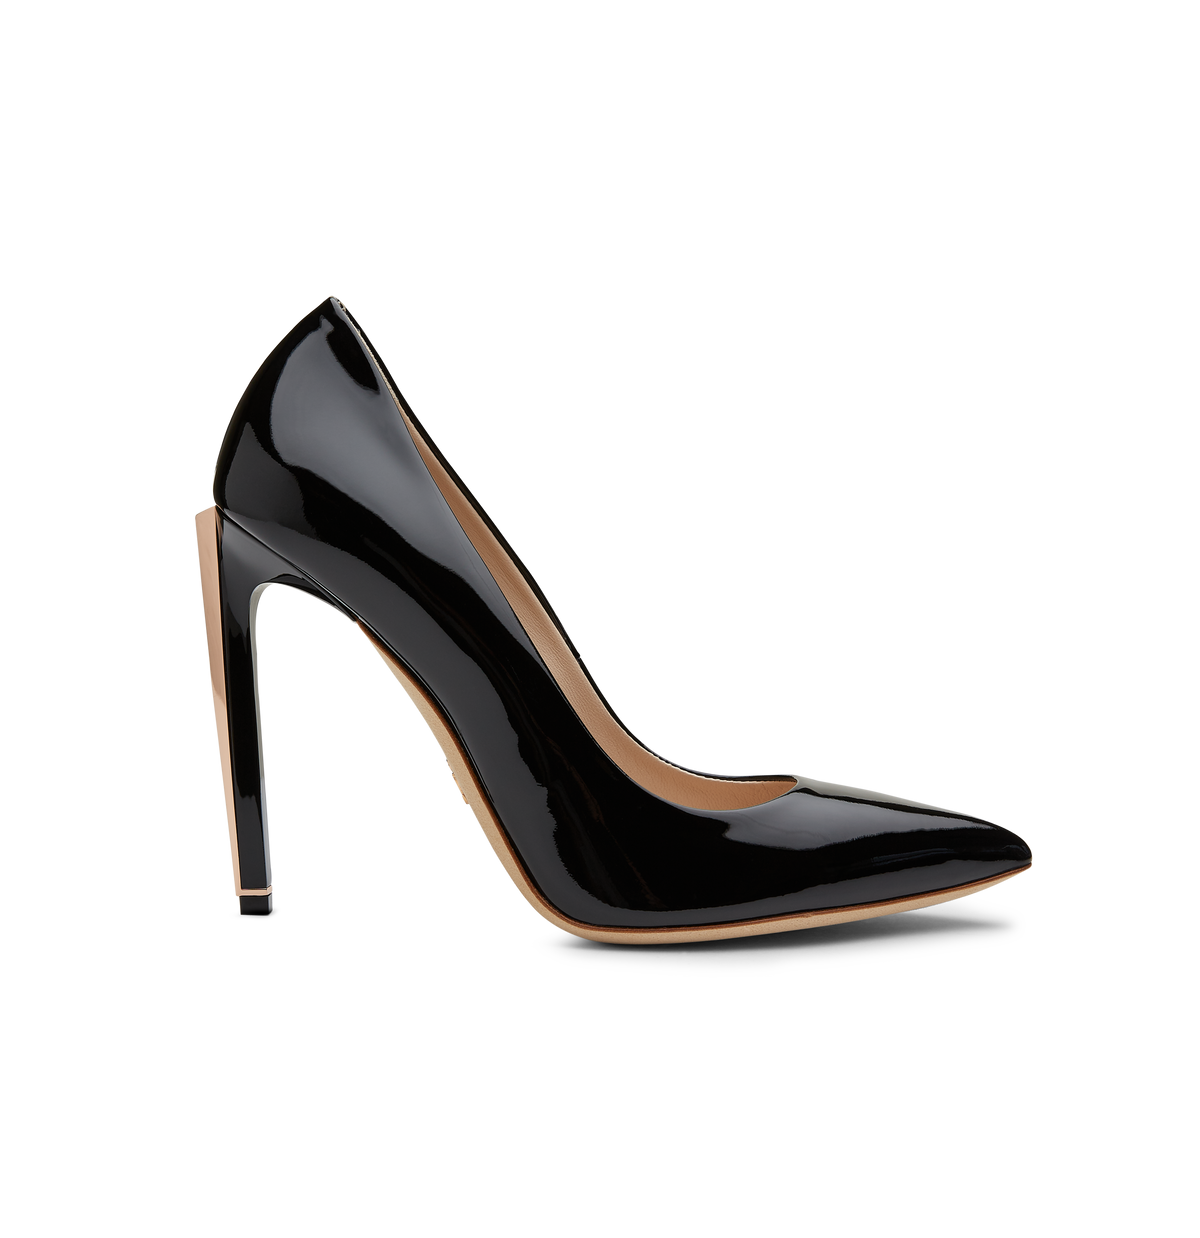 Black Patent Calf Leather With Rose Gold Hardware